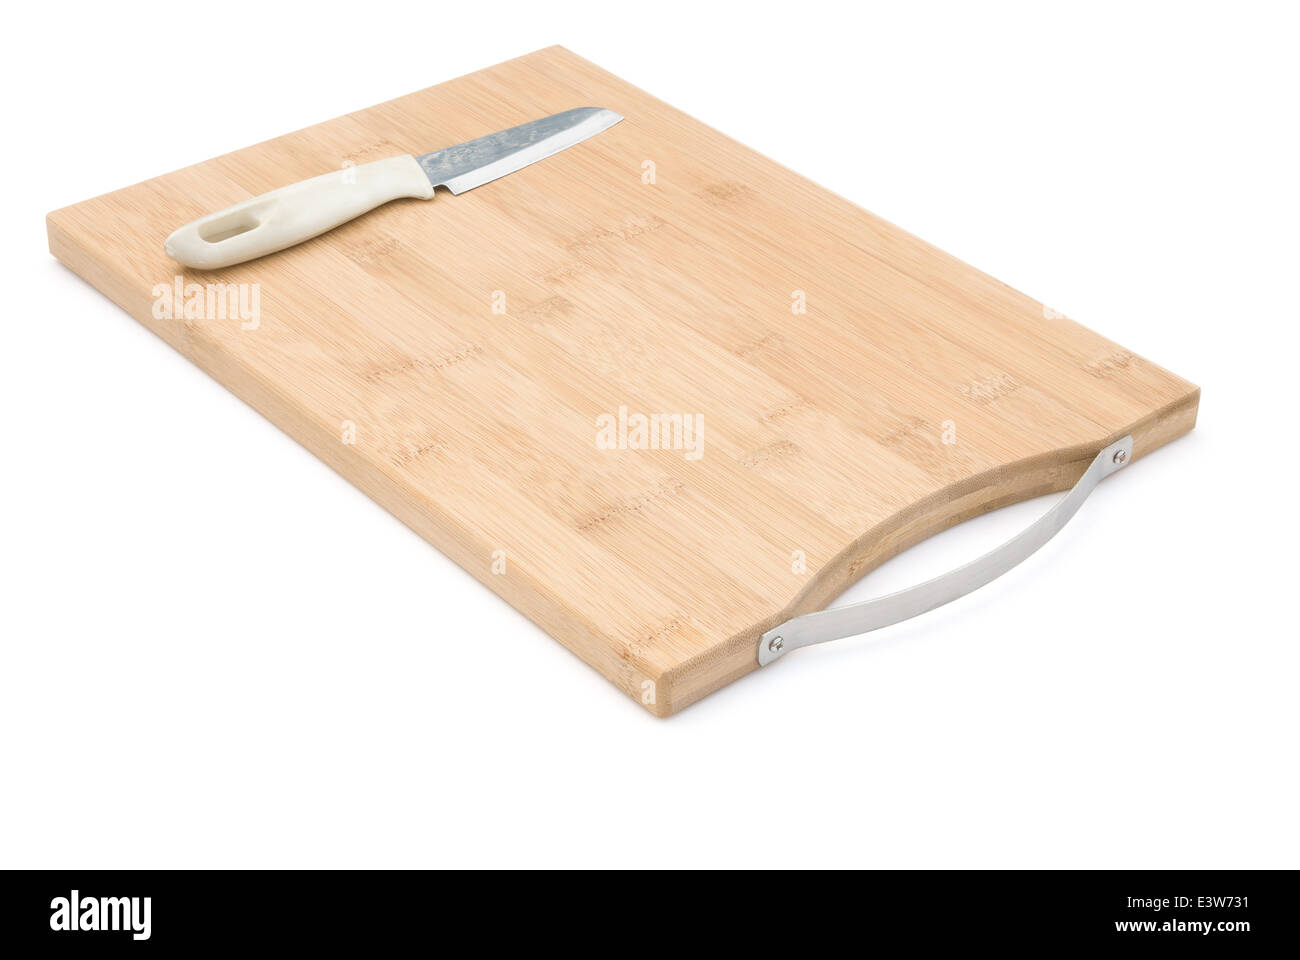 side view wooden chopping board and knife with clipping path Stock Photo